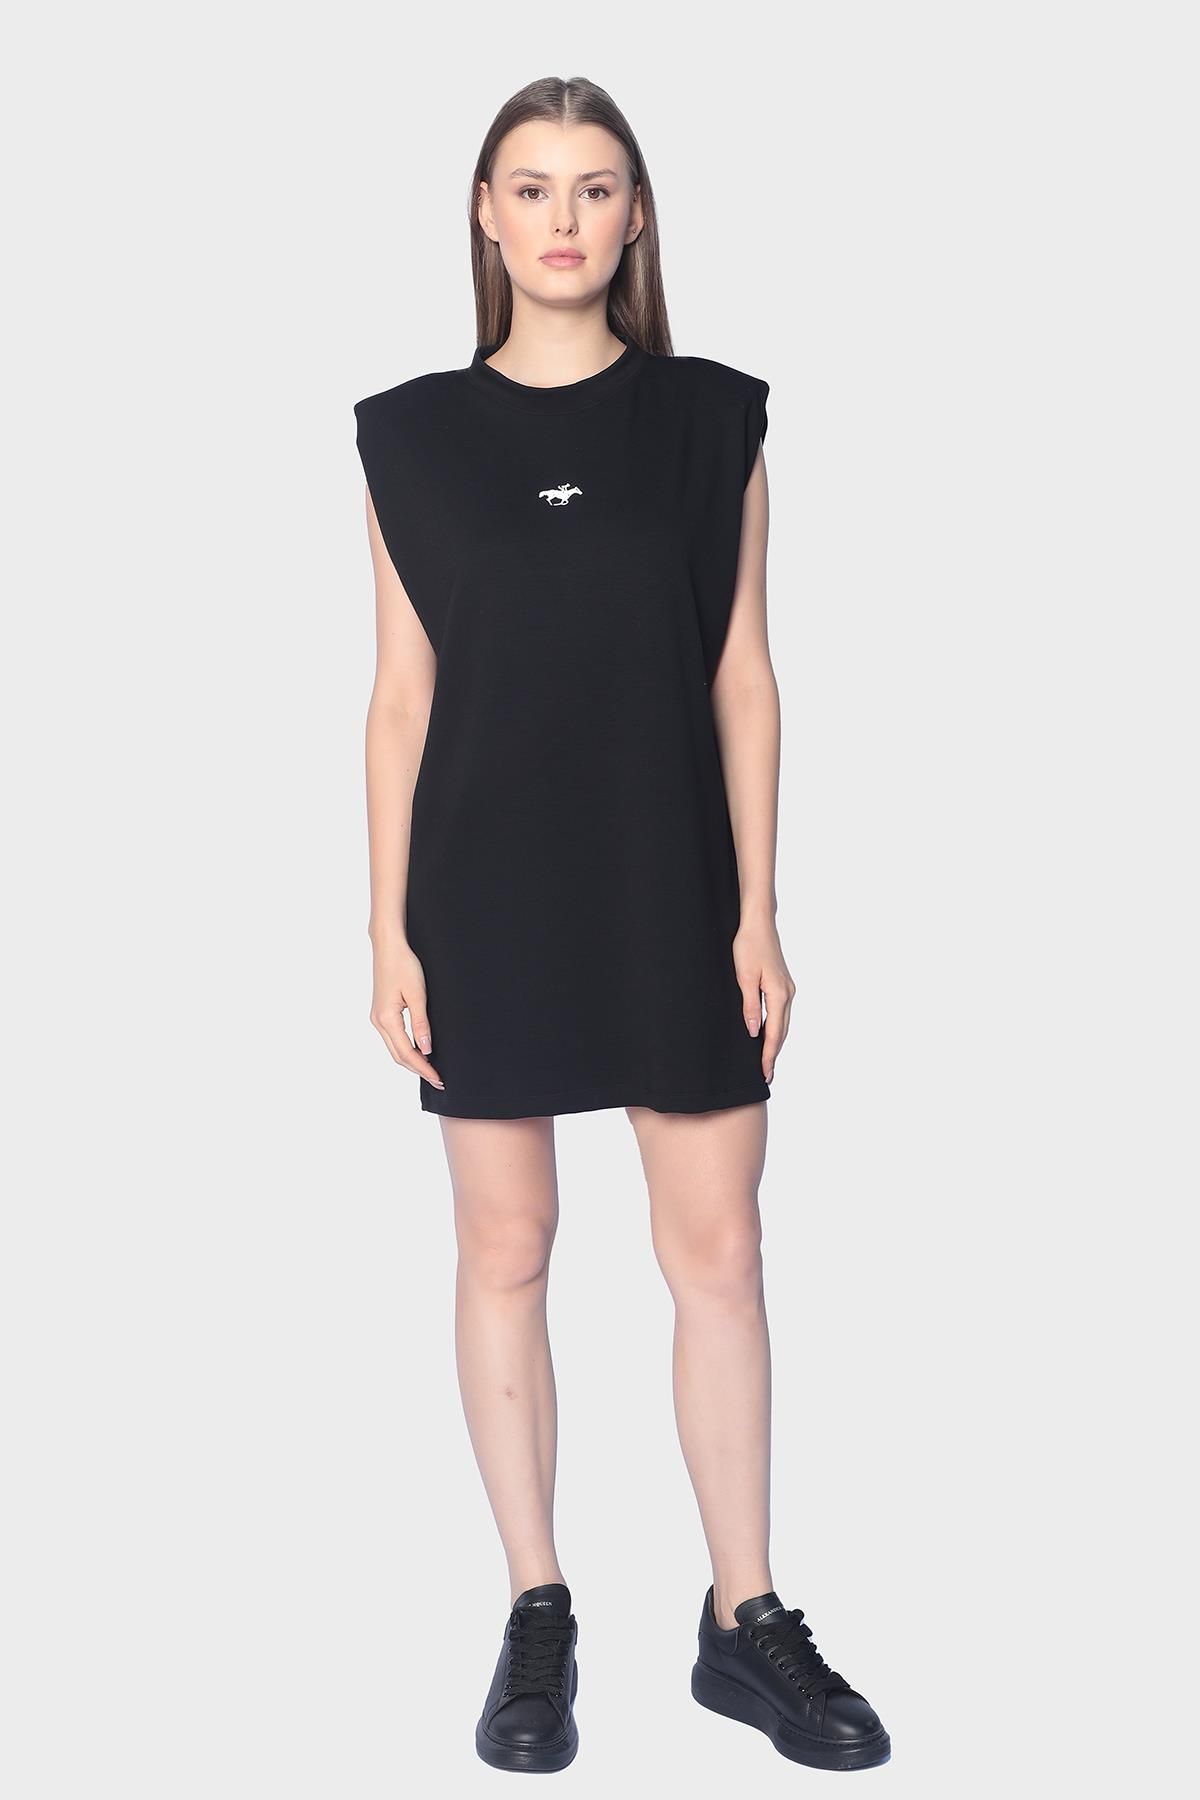 Sleeveless mini dress with oversized round neckline and shoulder support - Black